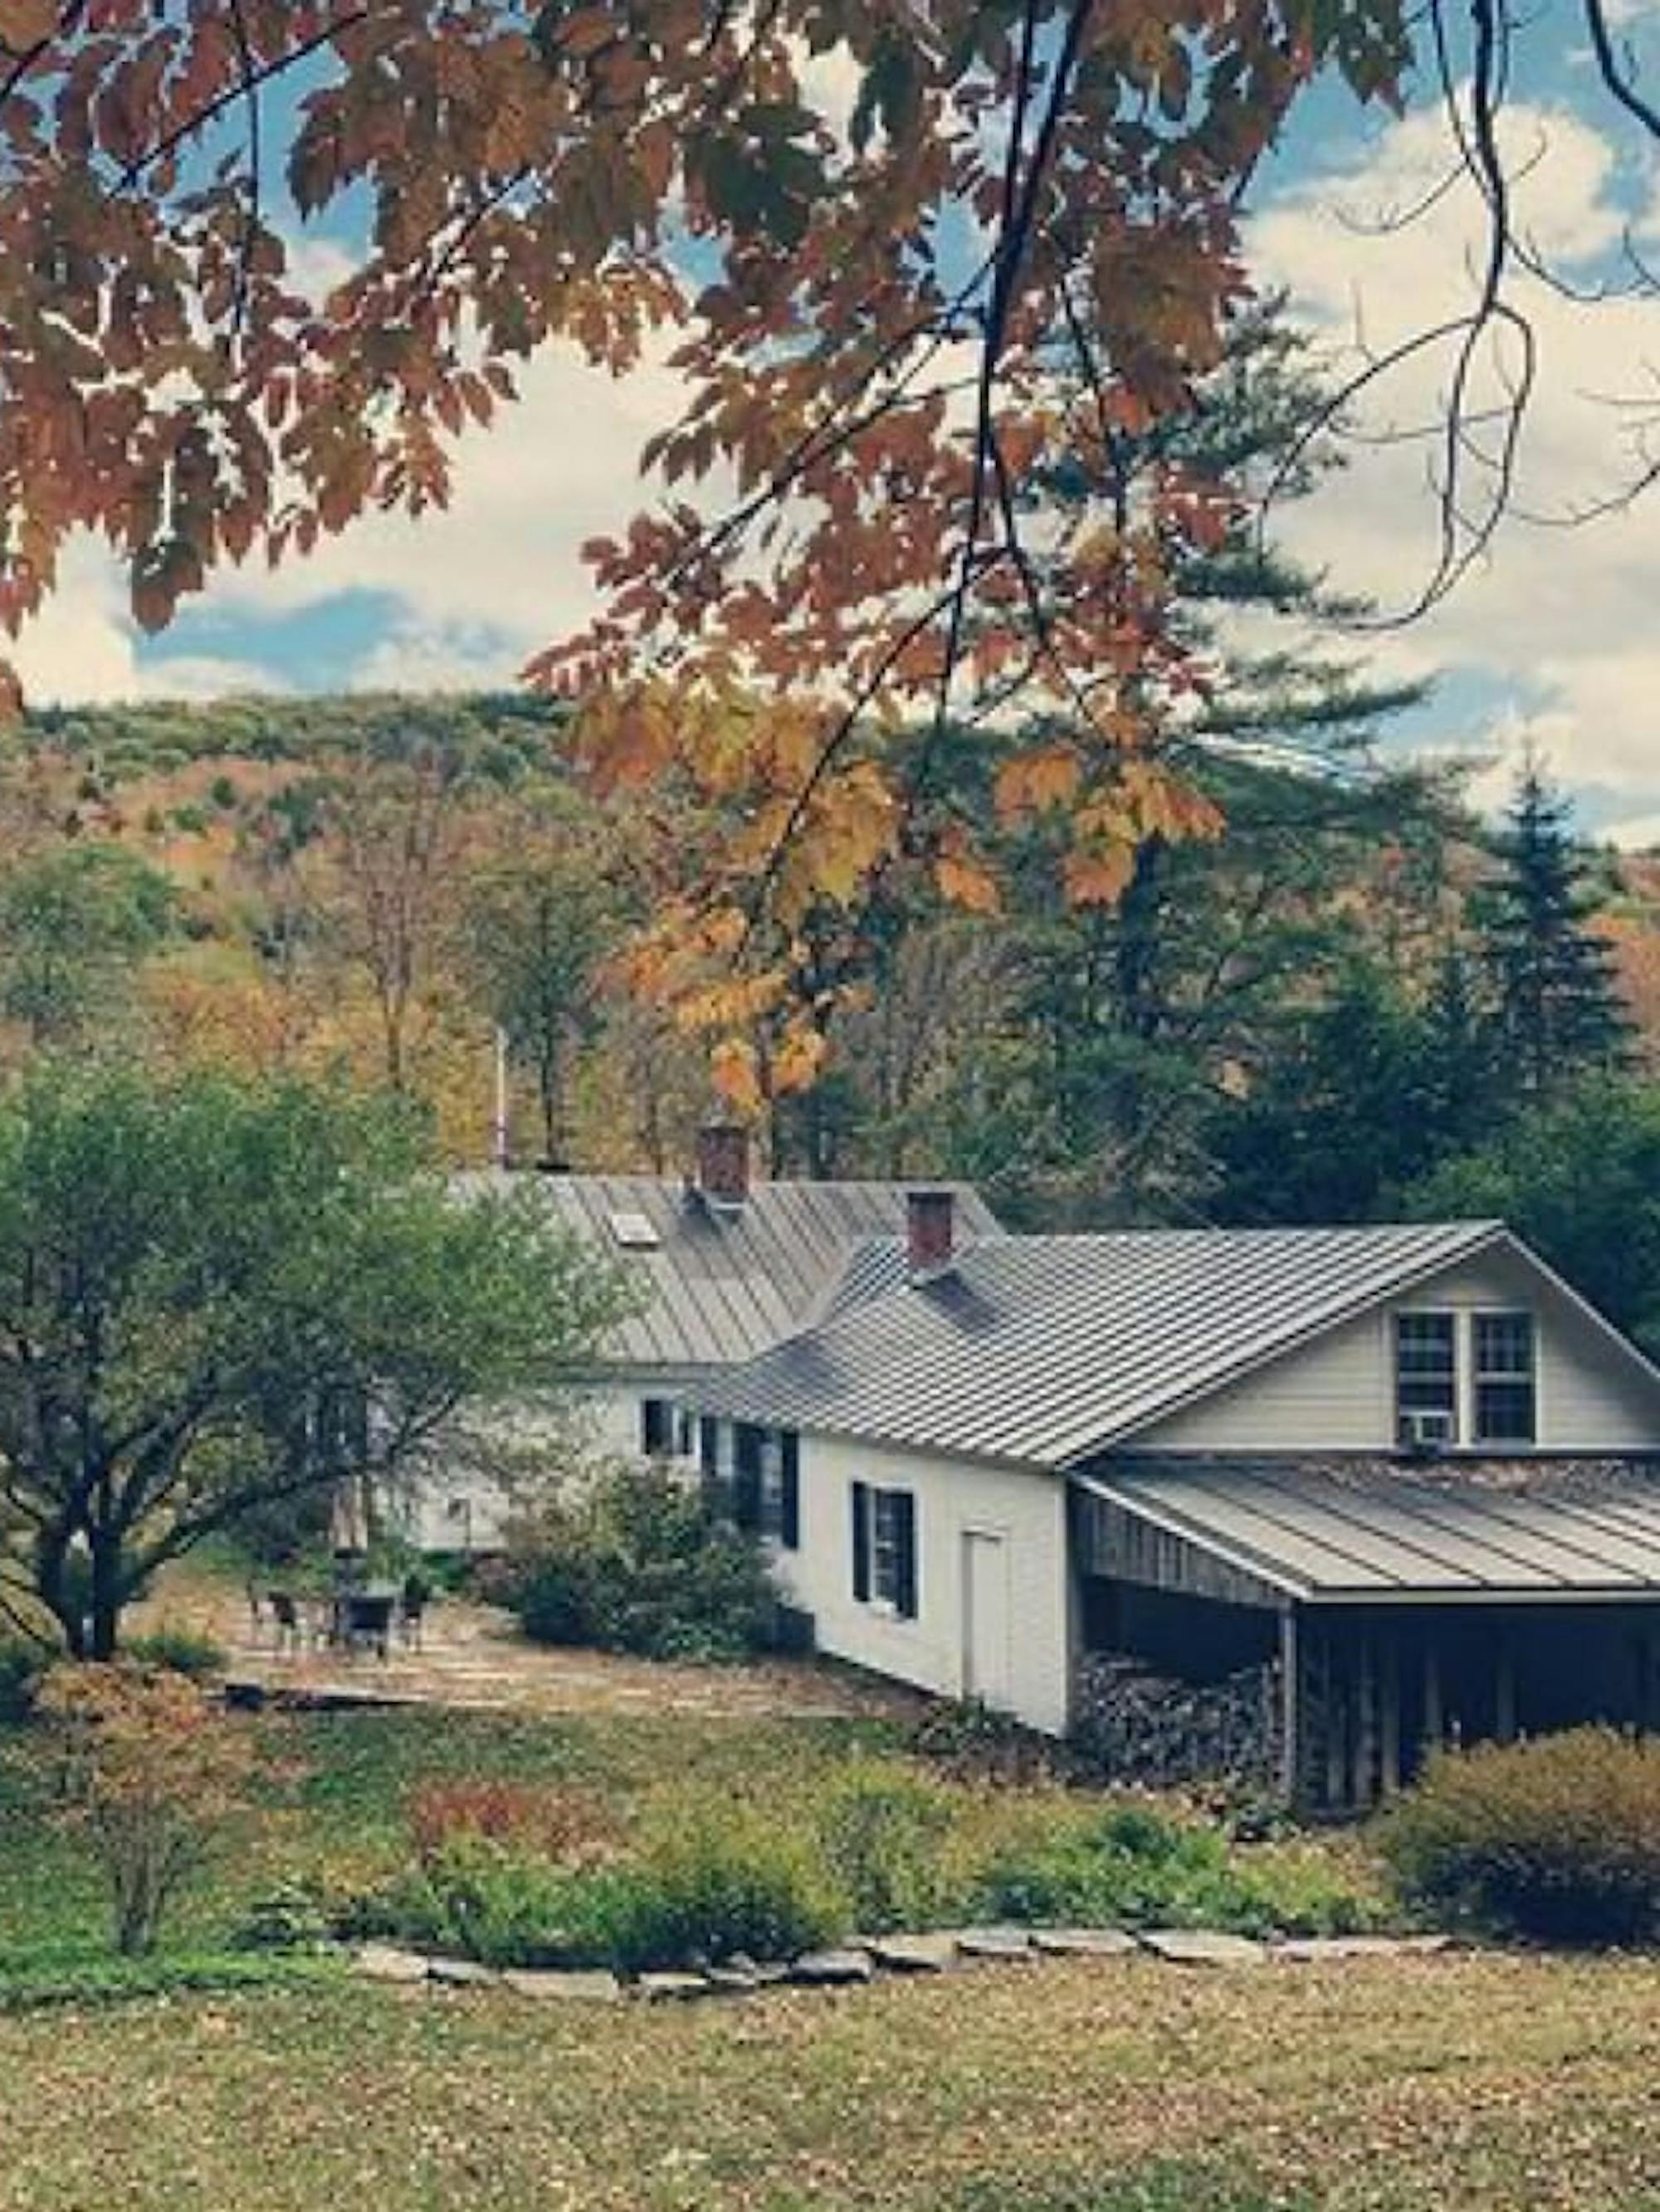 This is a picture of the Grafton House in a lovely fall scene. The house is white, with black shutters, and the foliage is red, orange, green, and yellow.